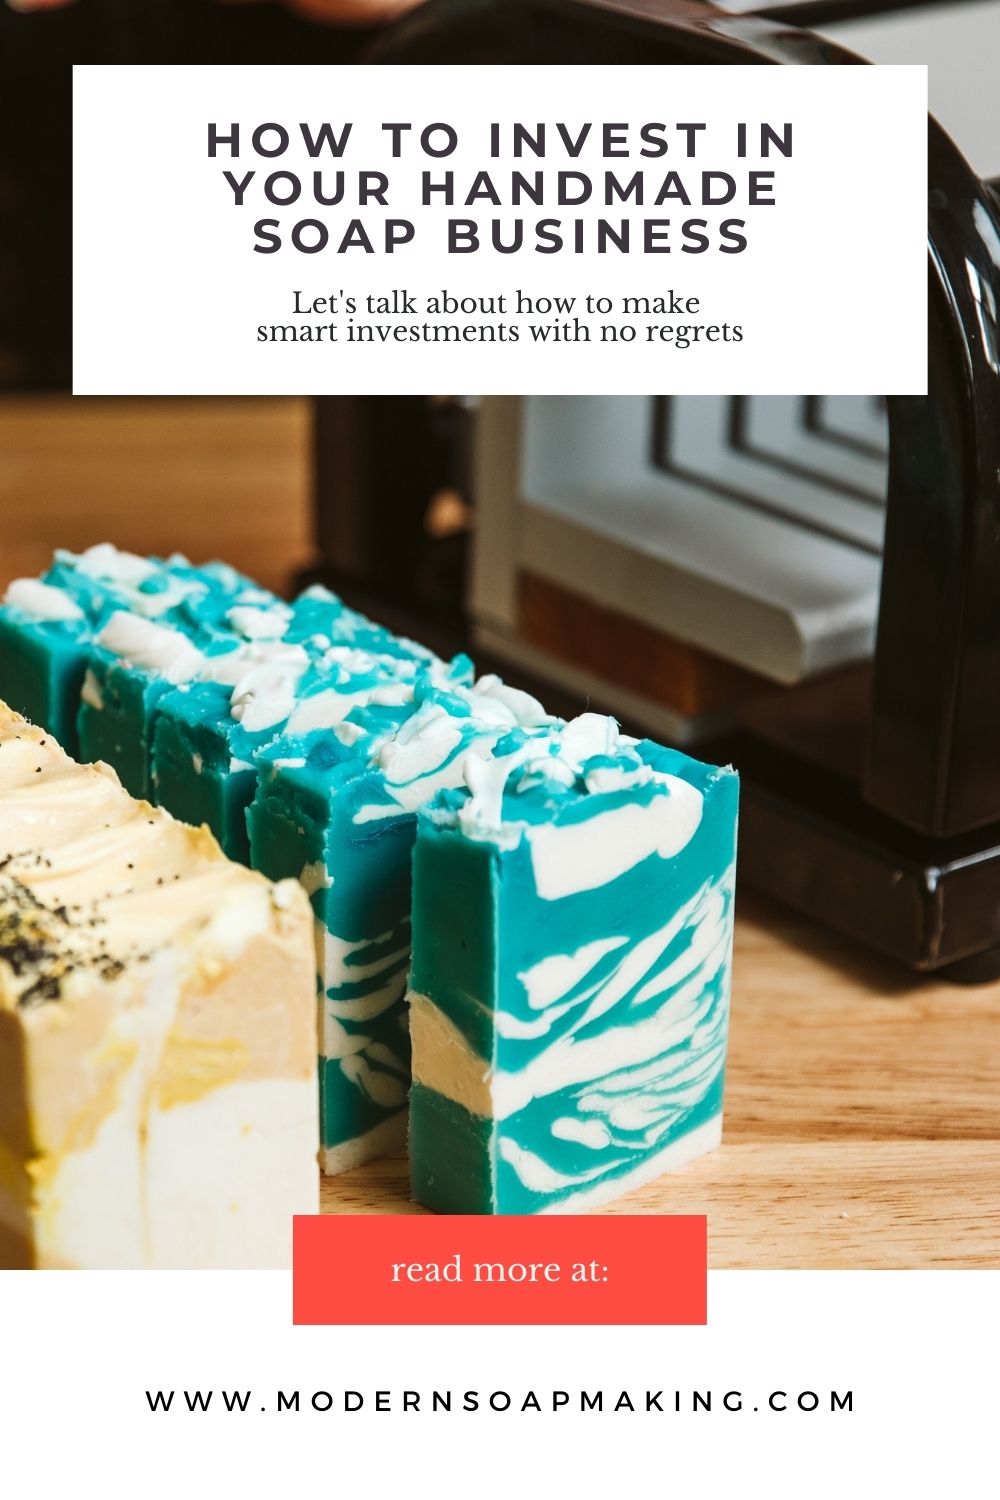 How to Invest in Your Soap Business Success - Pin on Pinterest